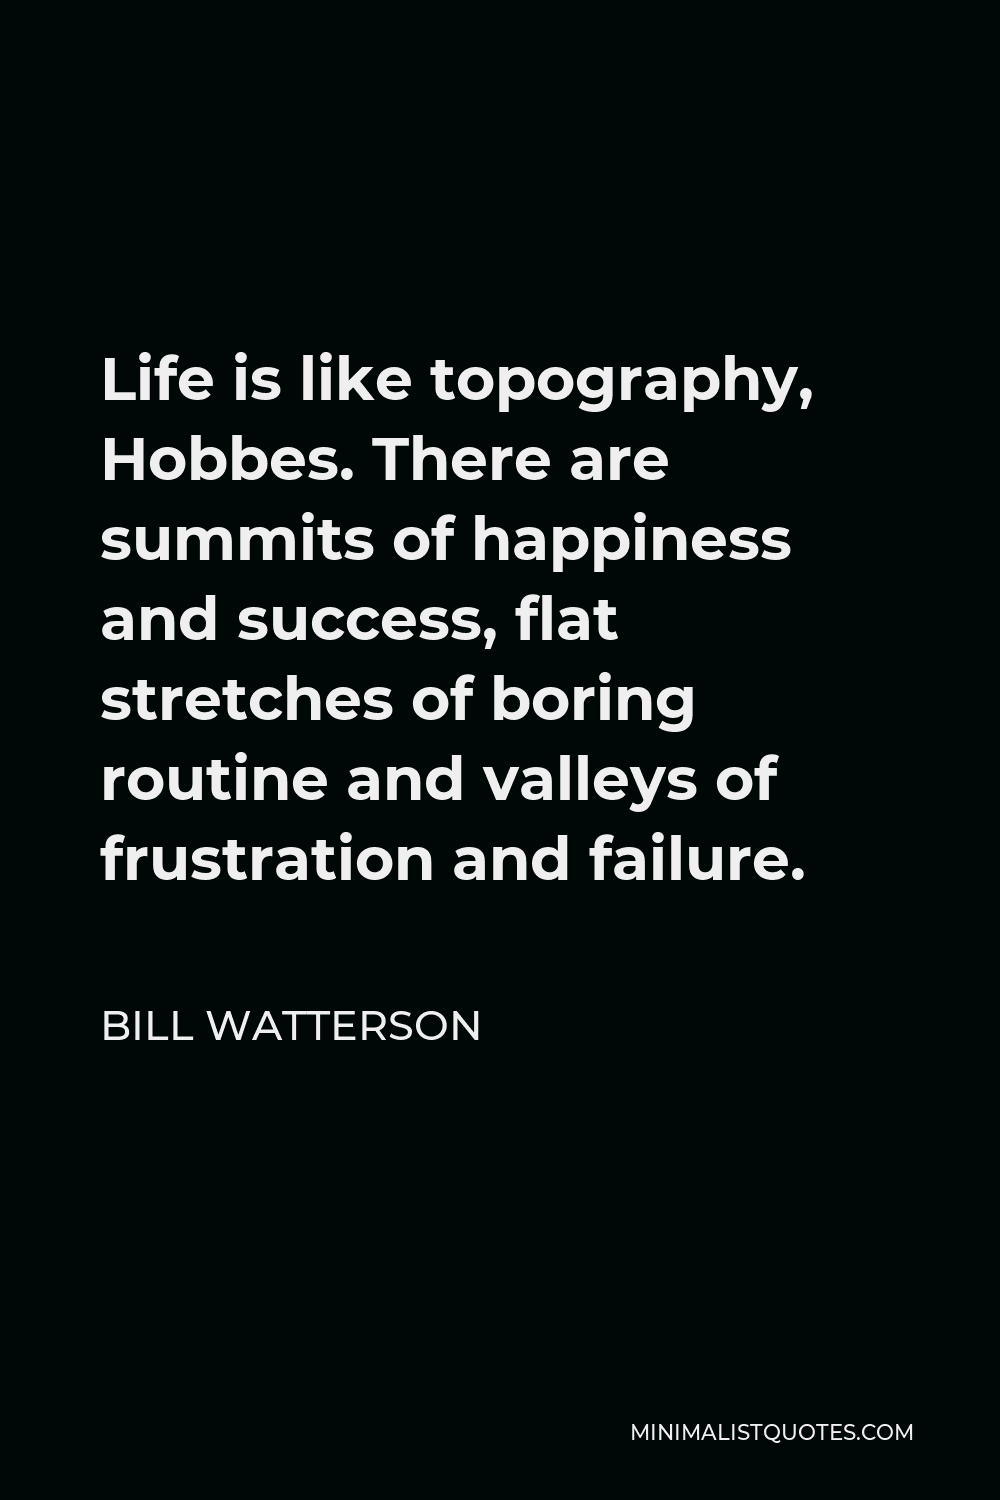 Bill Watterson Quote - Life is like topography, Hobbes. There are summits of happiness and success, flat stretches of boring routine and valleys of frustration and failure.